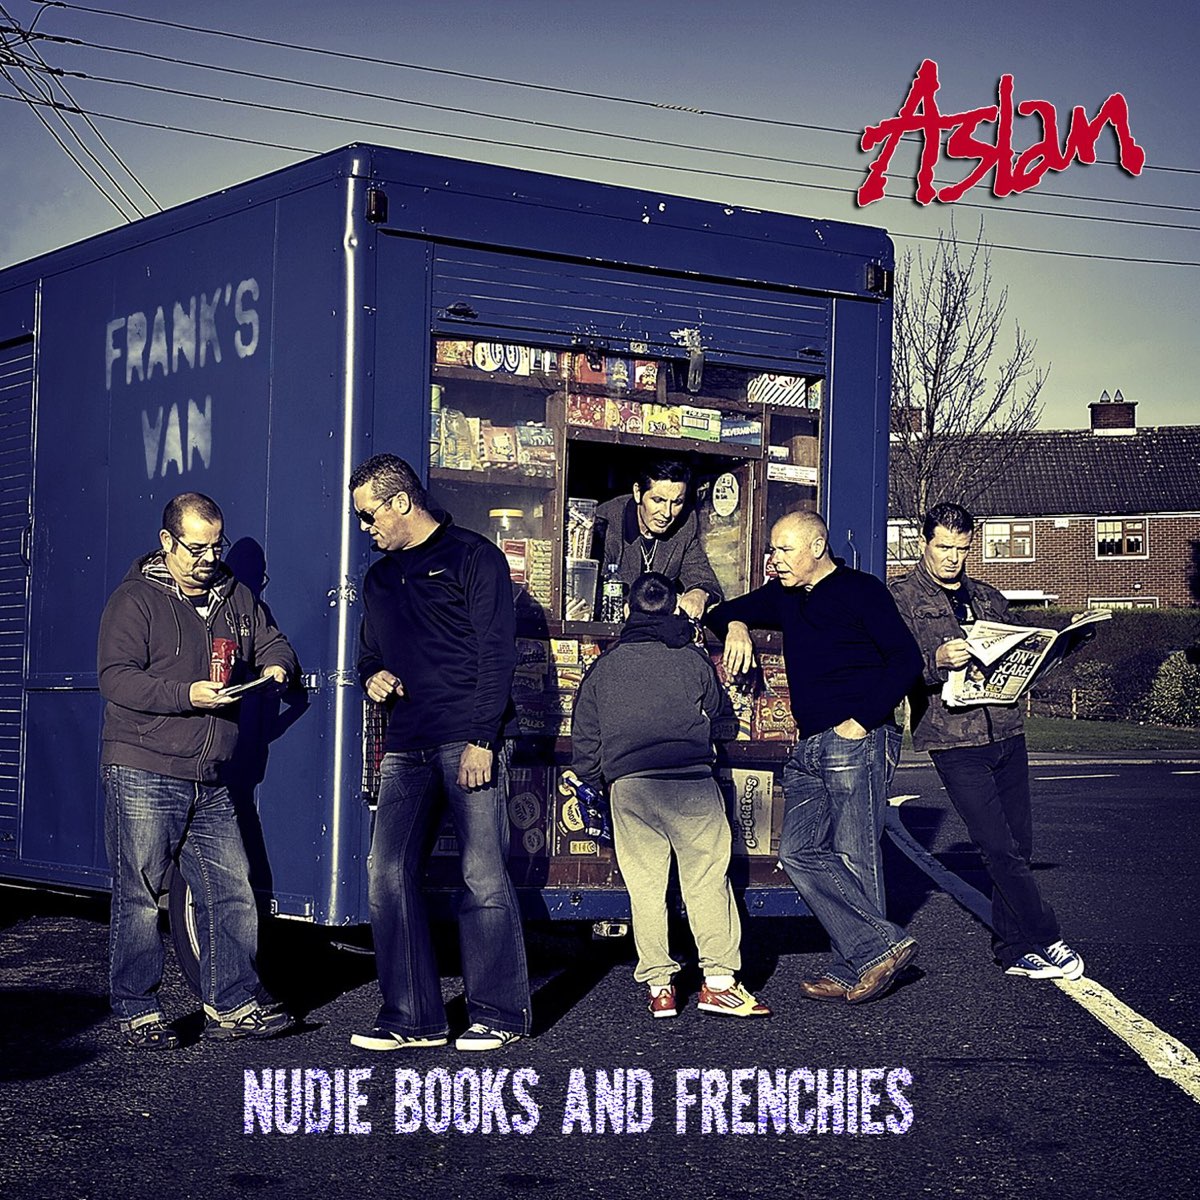 ‎Nudie Books and Frenchies by Aslan on Apple Music